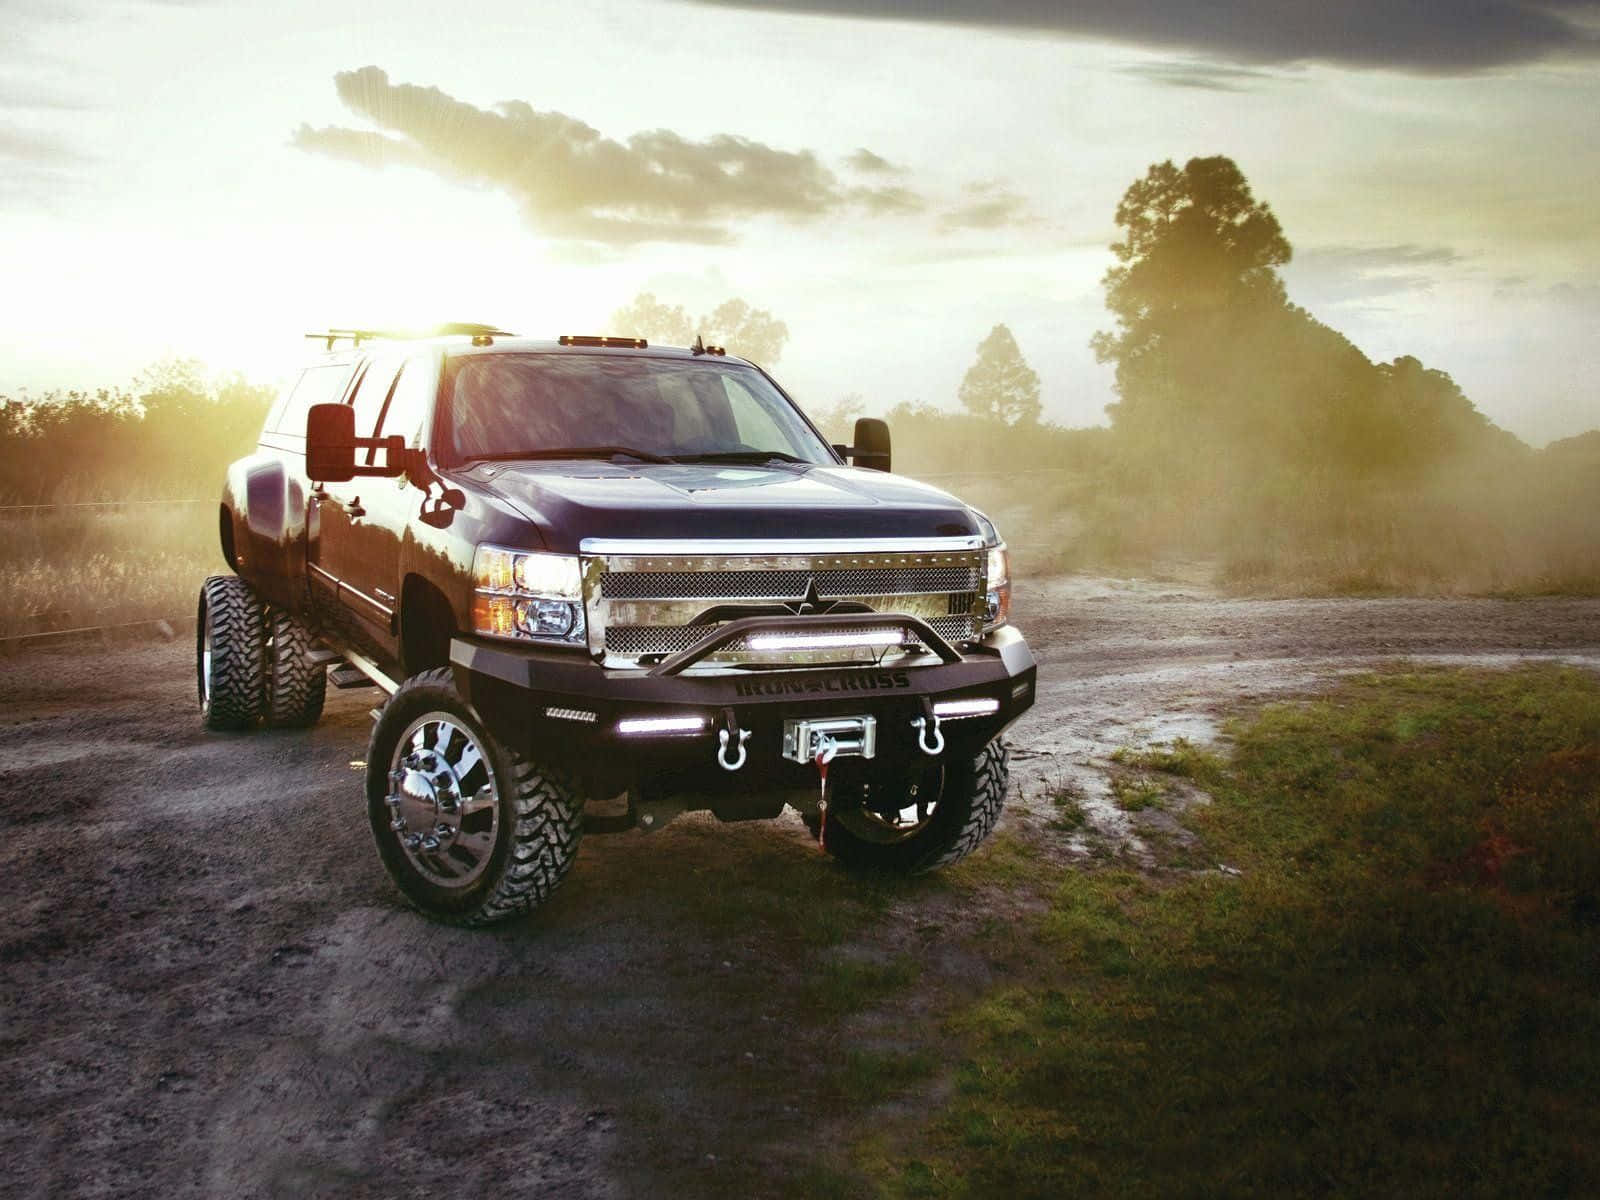 Lifted Truck On A Dirt Road Wallpaper